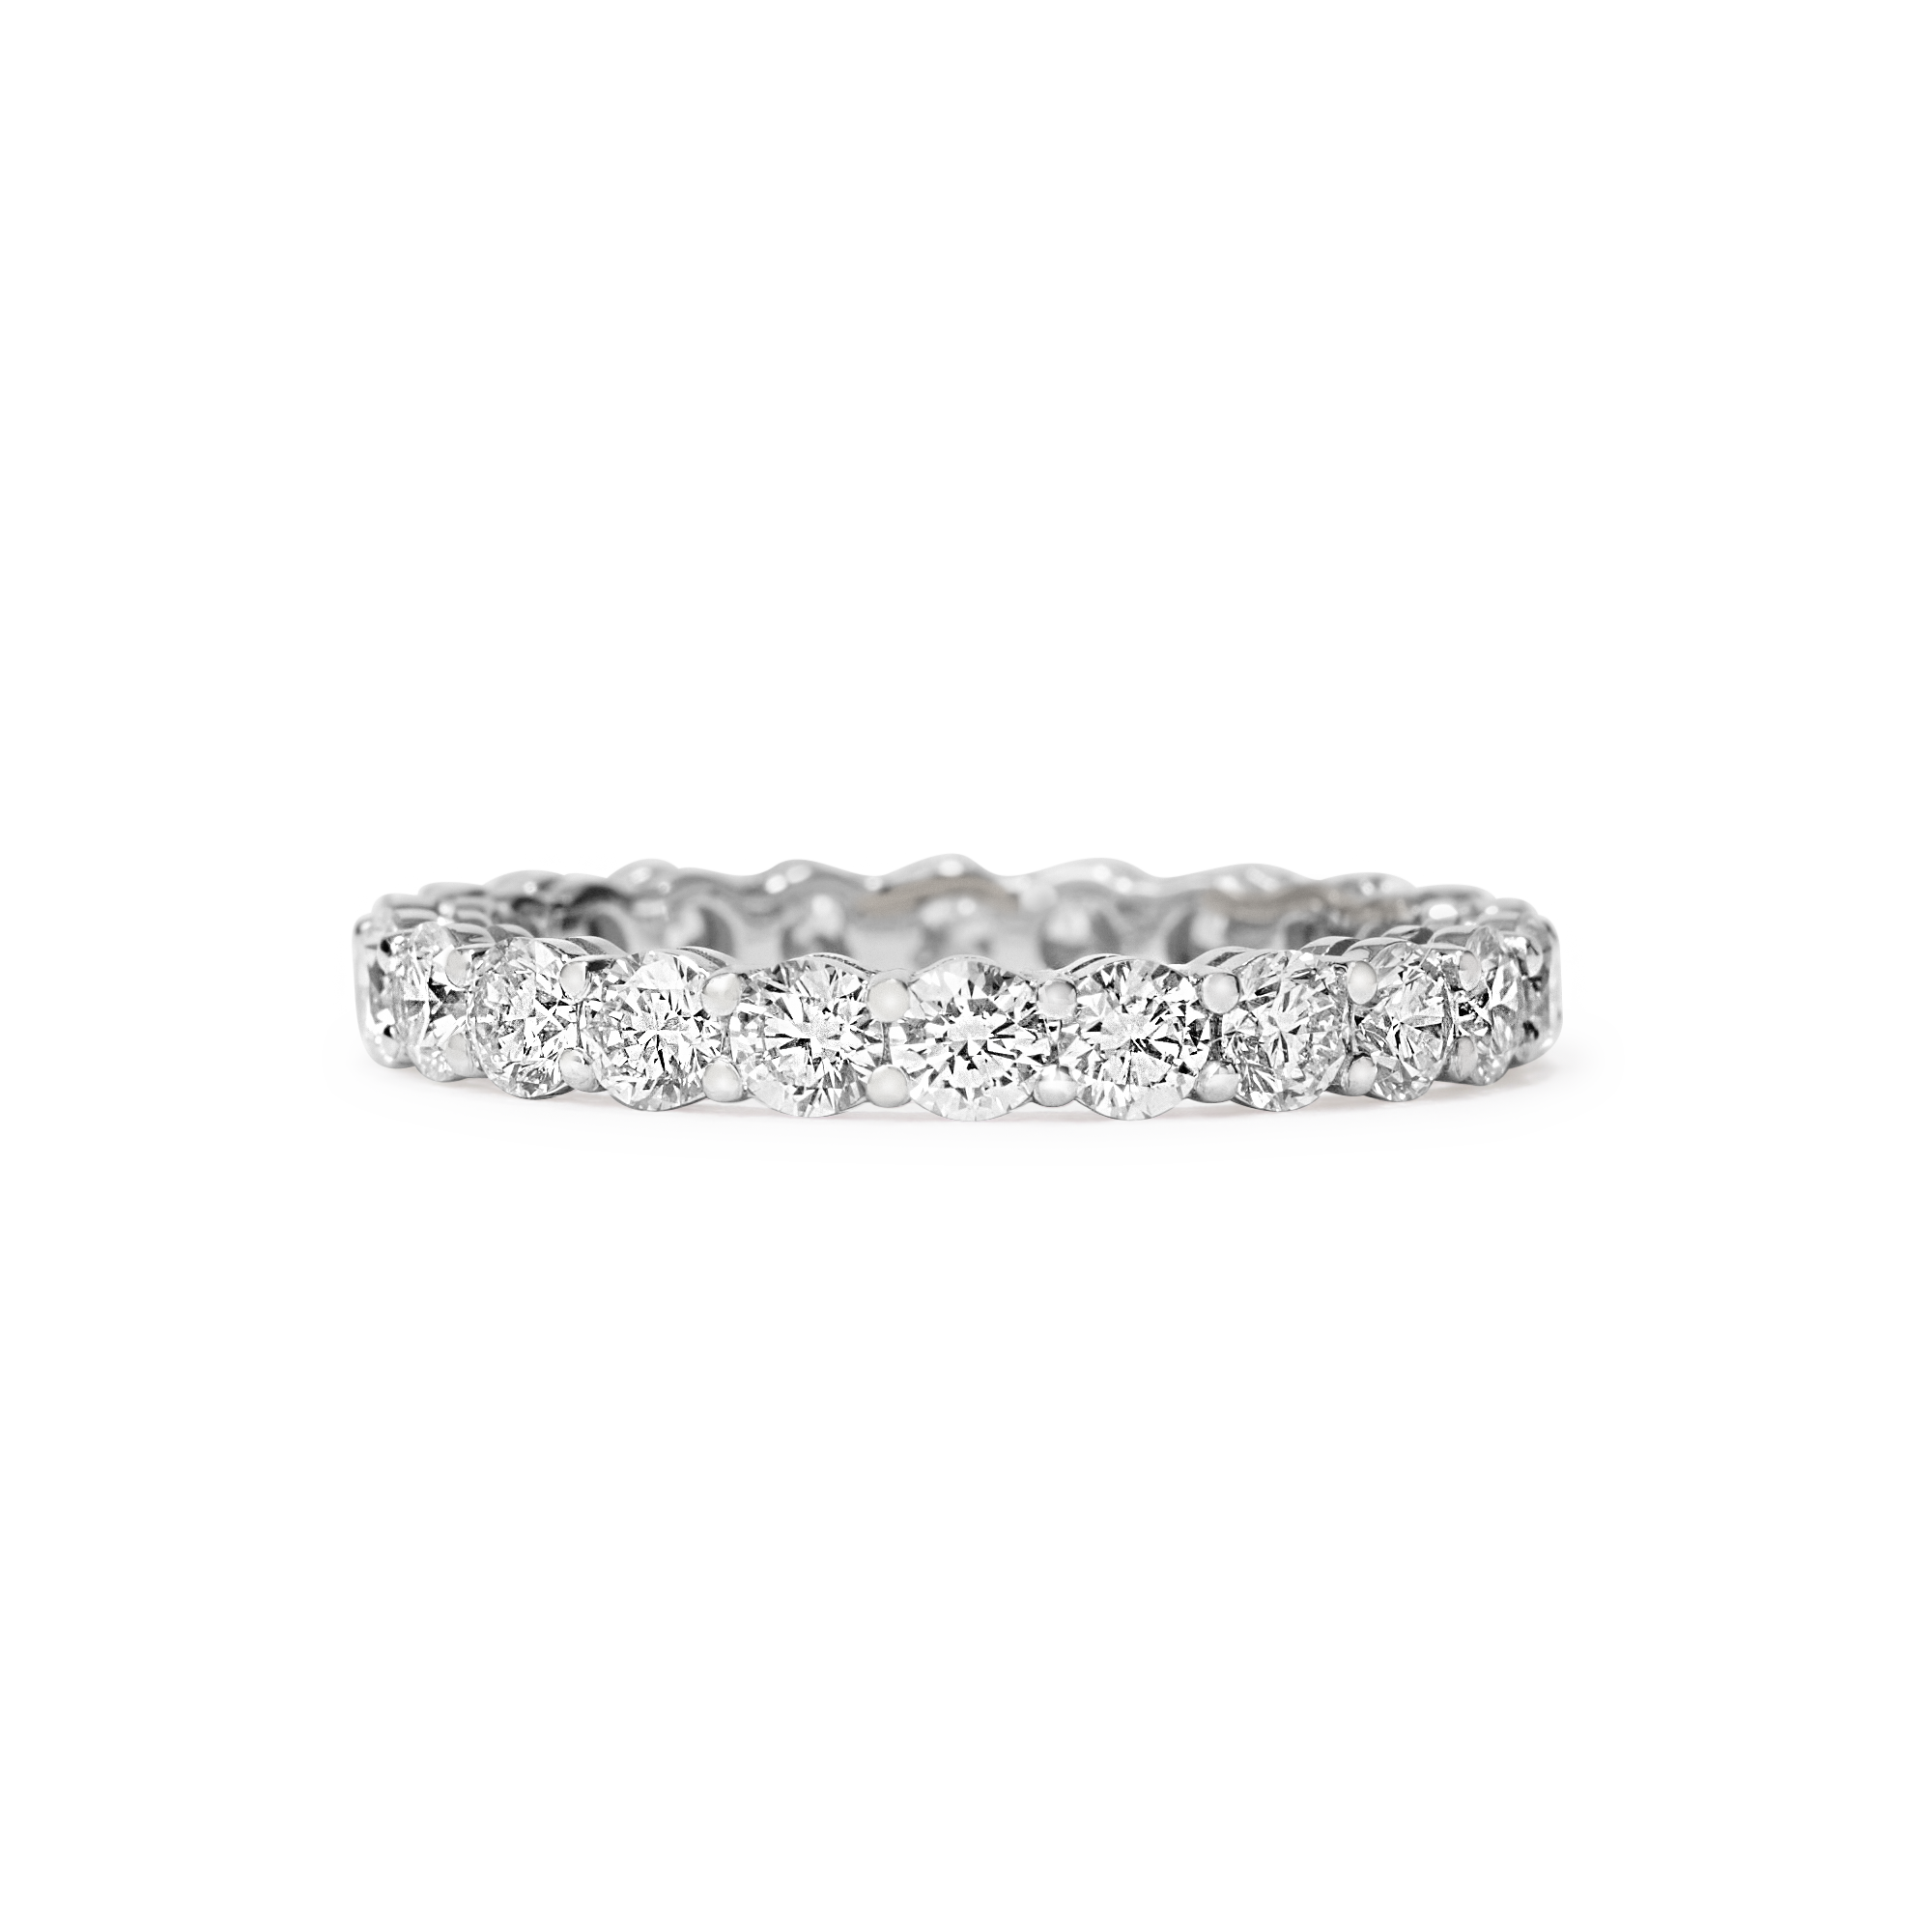 Or & Elle's Sans Cesse Round diamond eternity band features D color, IF/VVS clarity round brilliants held in recycled 18k gold by an elegant scalloped setting. Size and color are fully customizable. White gold shown here. Available in two carat weights: 2.5 and 5 (based on a U.S. size 7).